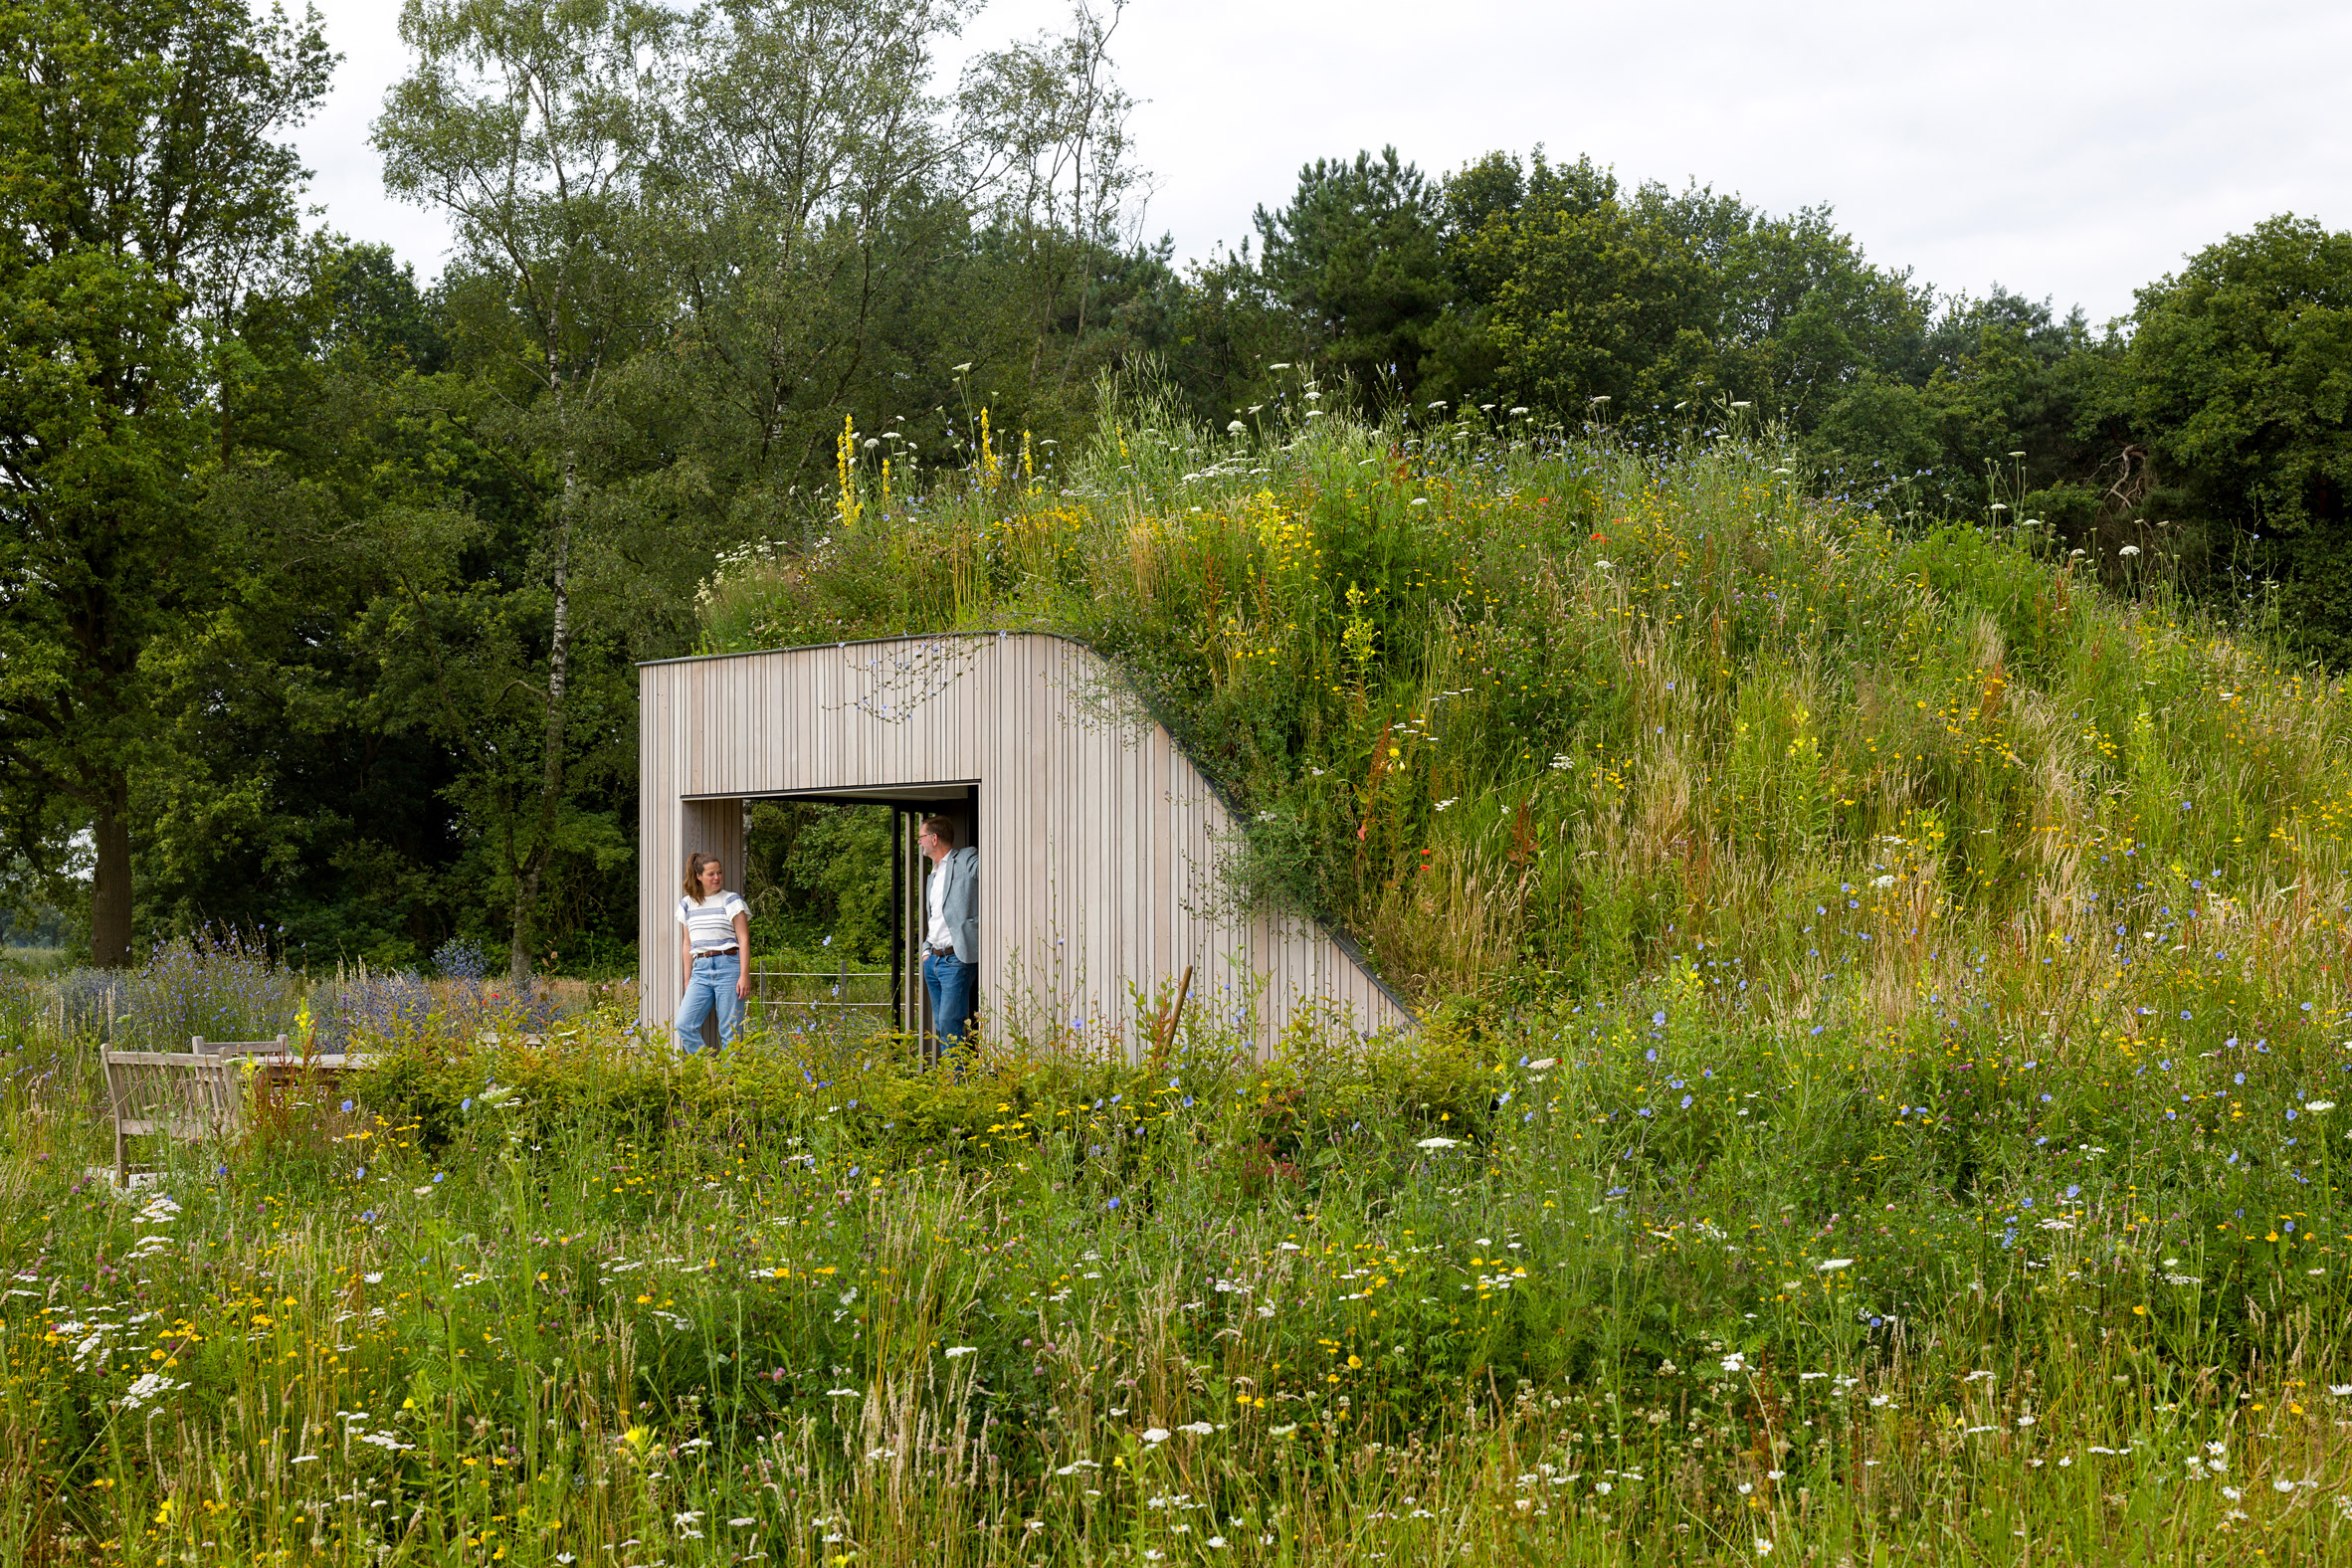 The House Under The Ground by WillemsenU with a grassy rooftop